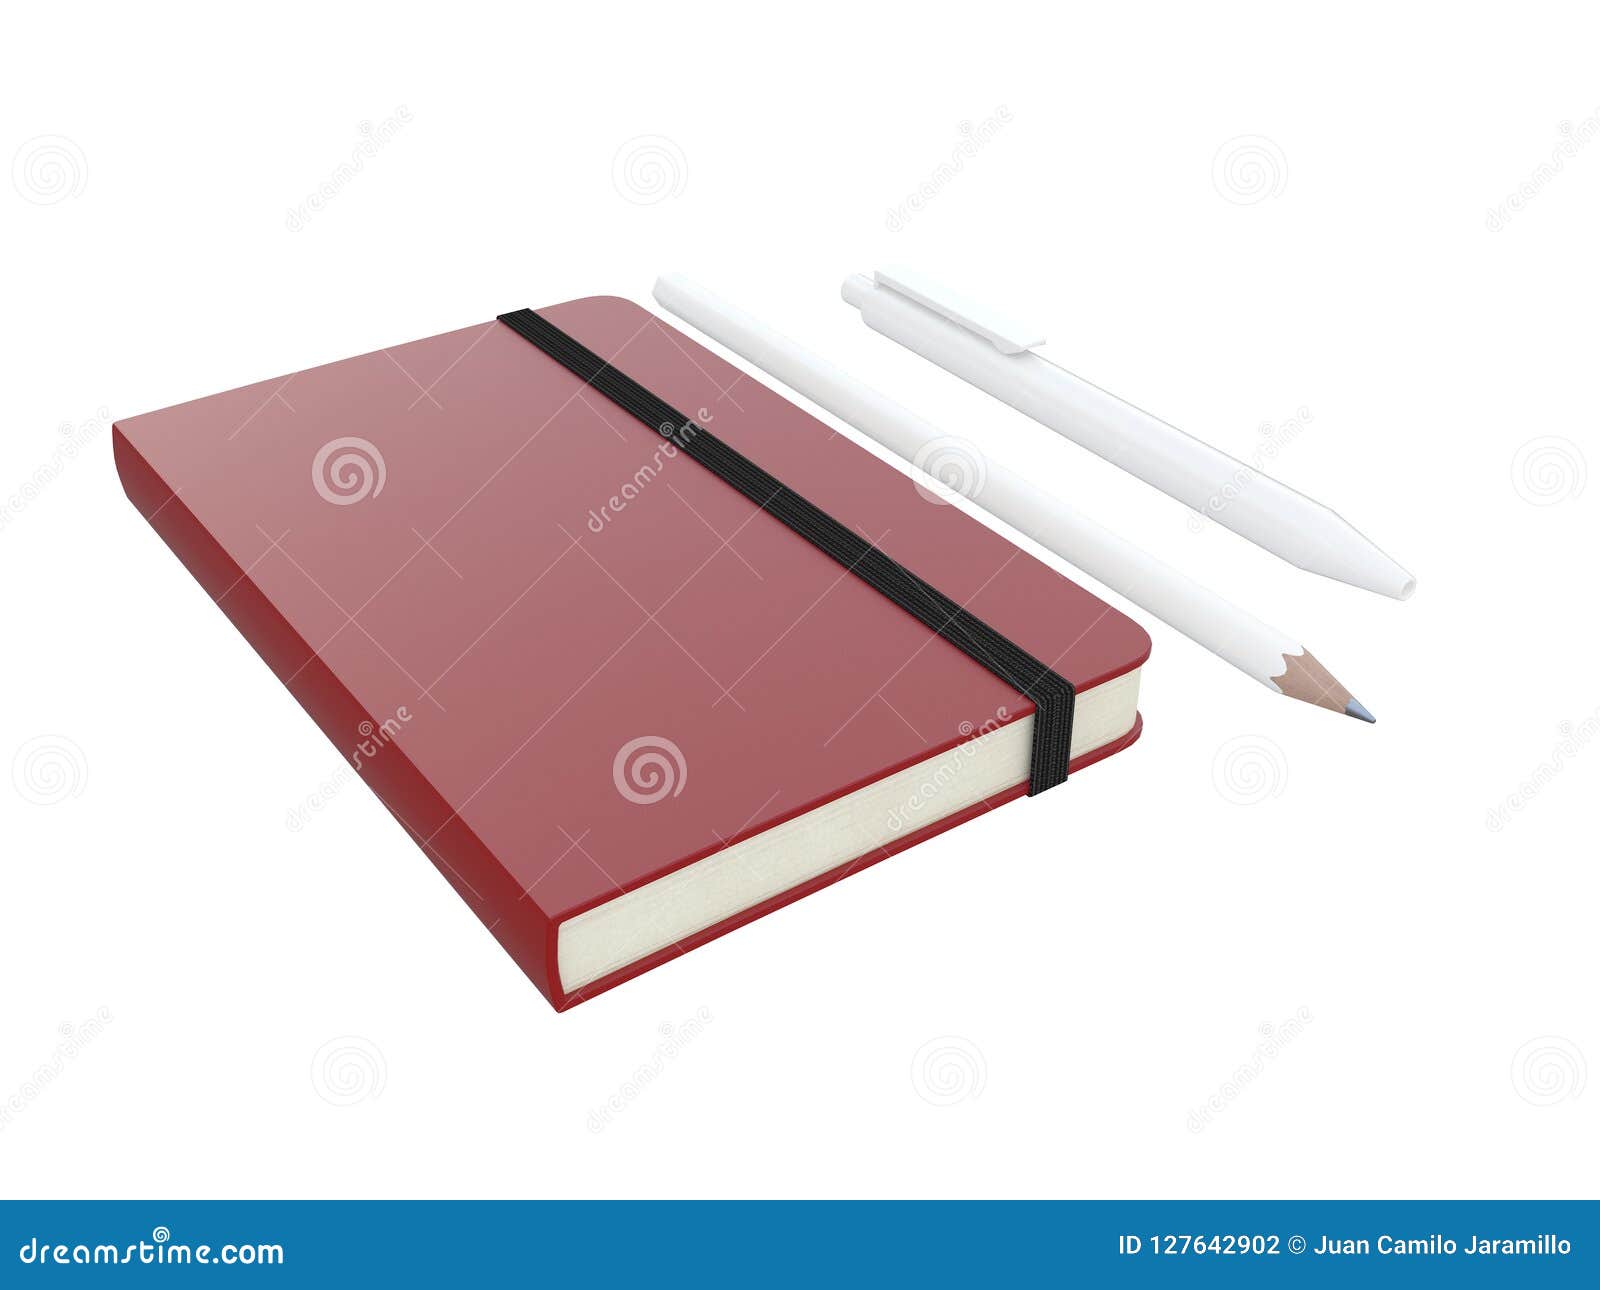 red moleskine or notebook with pen and pencil and a black strap front or top view  on a white background 3d rendering